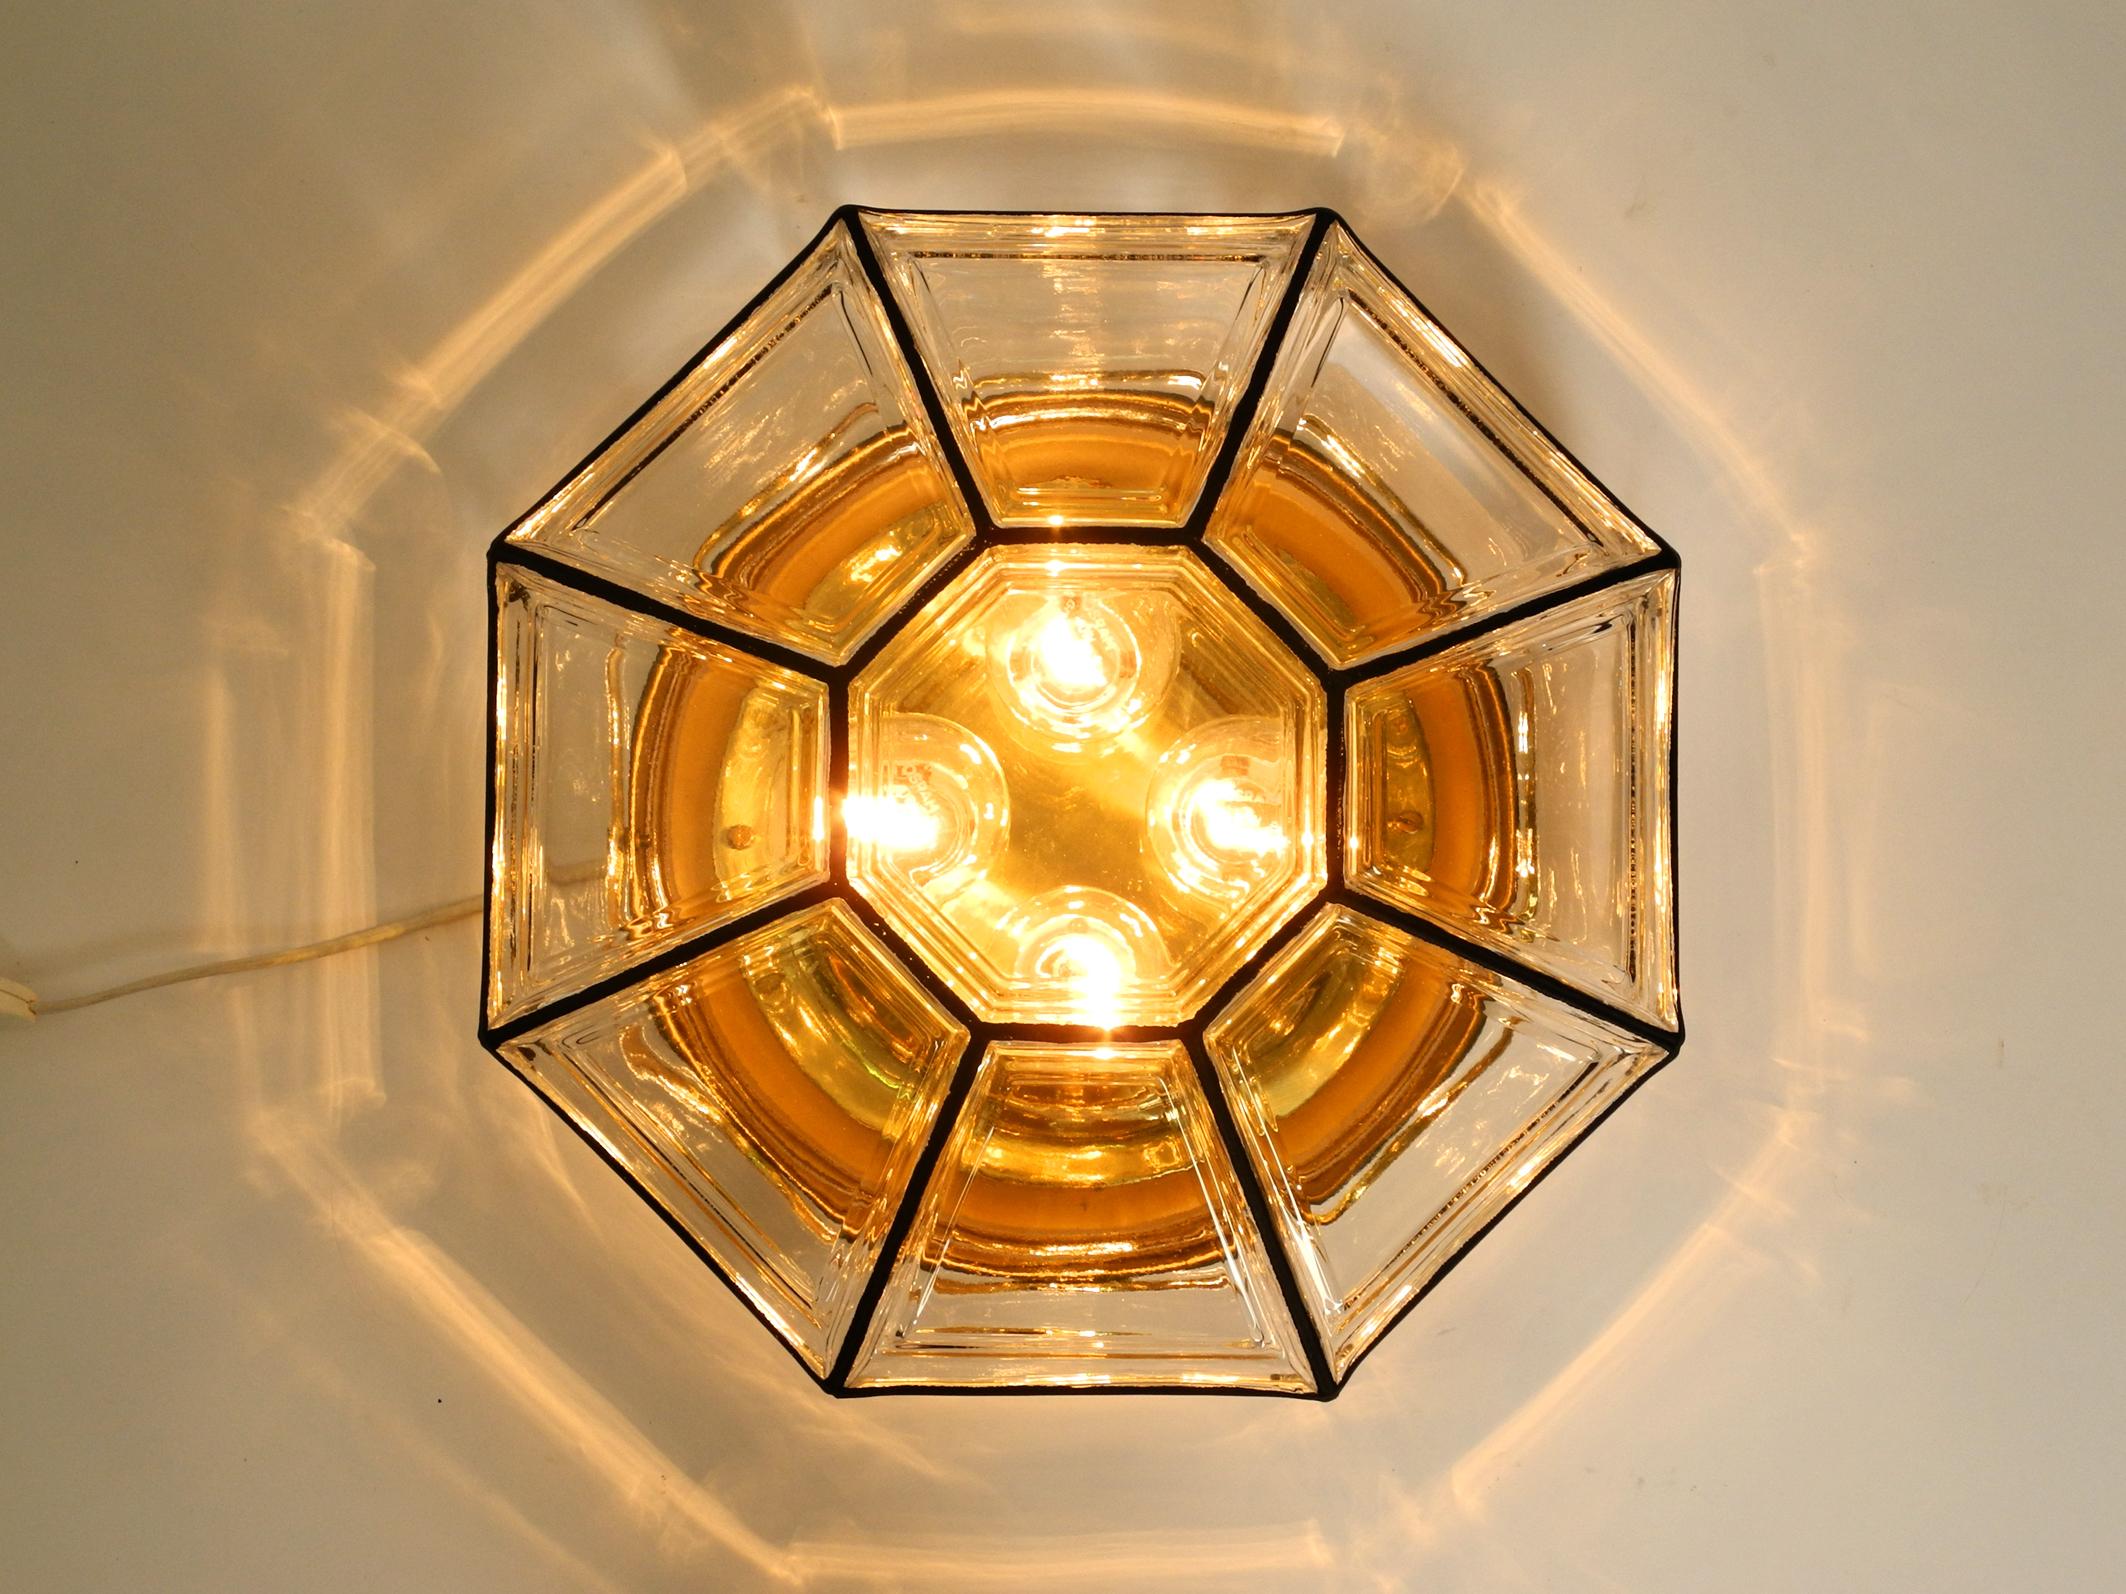 Late 20th Century 1970s Extra Large Limburg Glass Ceiling Lamp in Octagon Shape with 4 Sockets